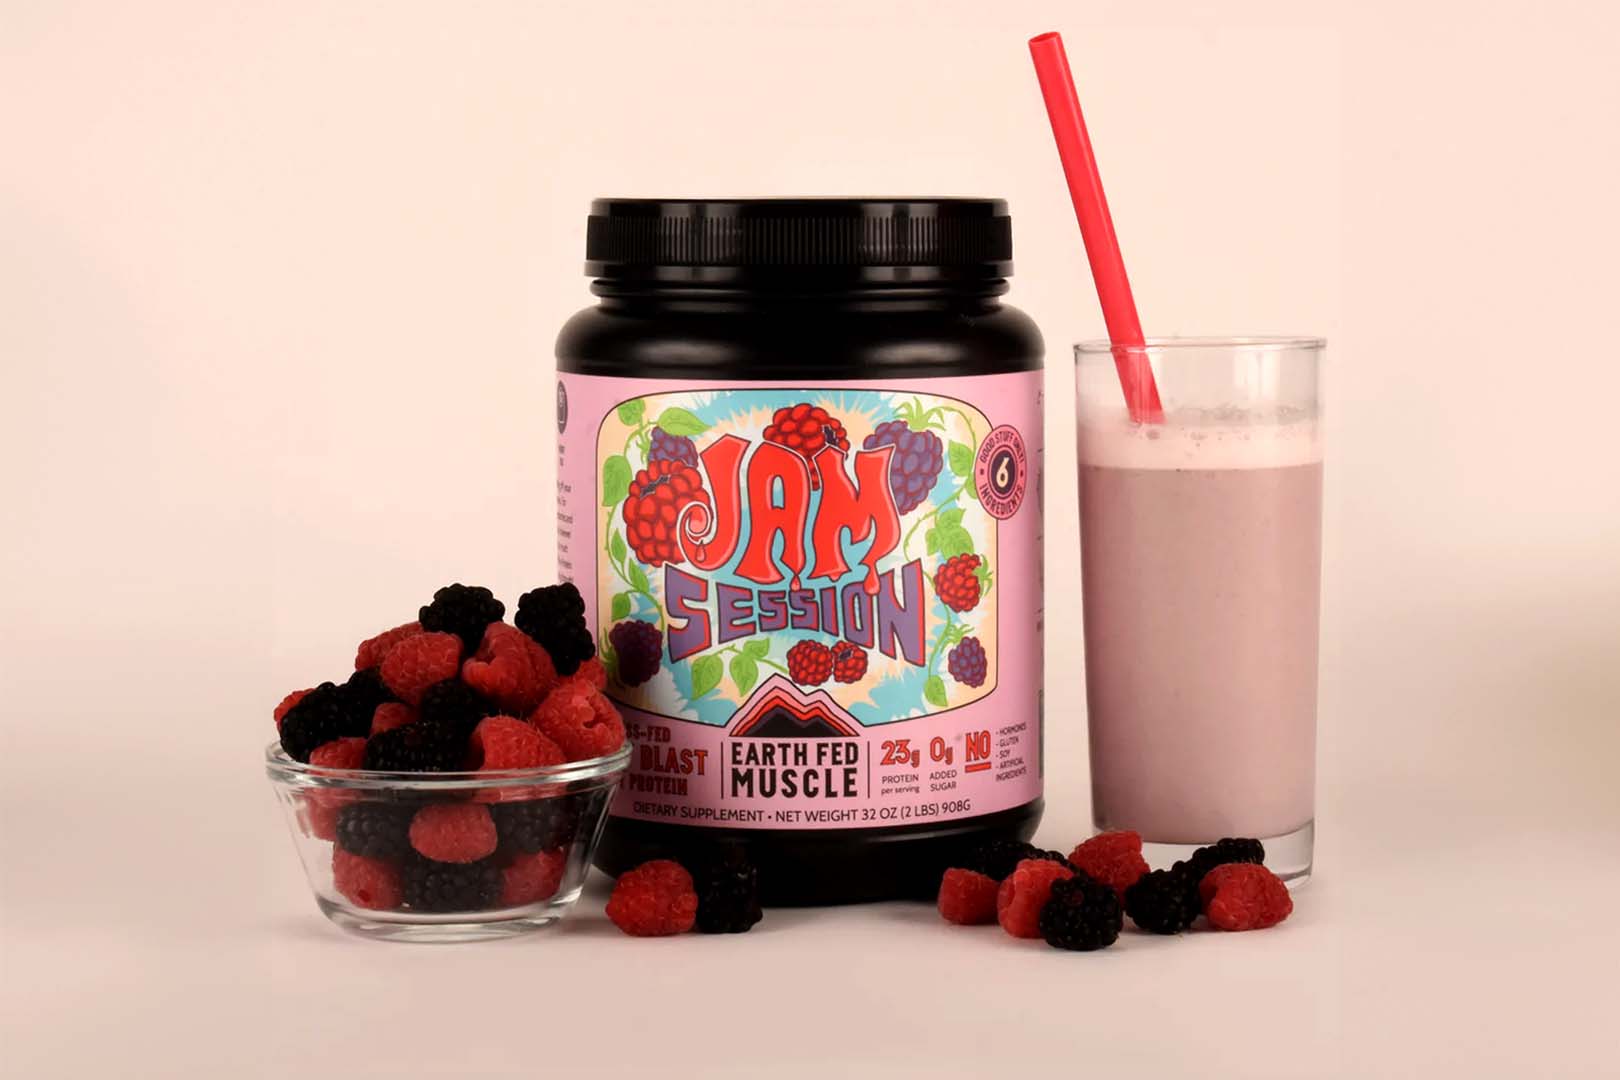 Earth Fed Muscle Jam Session Whey Protein